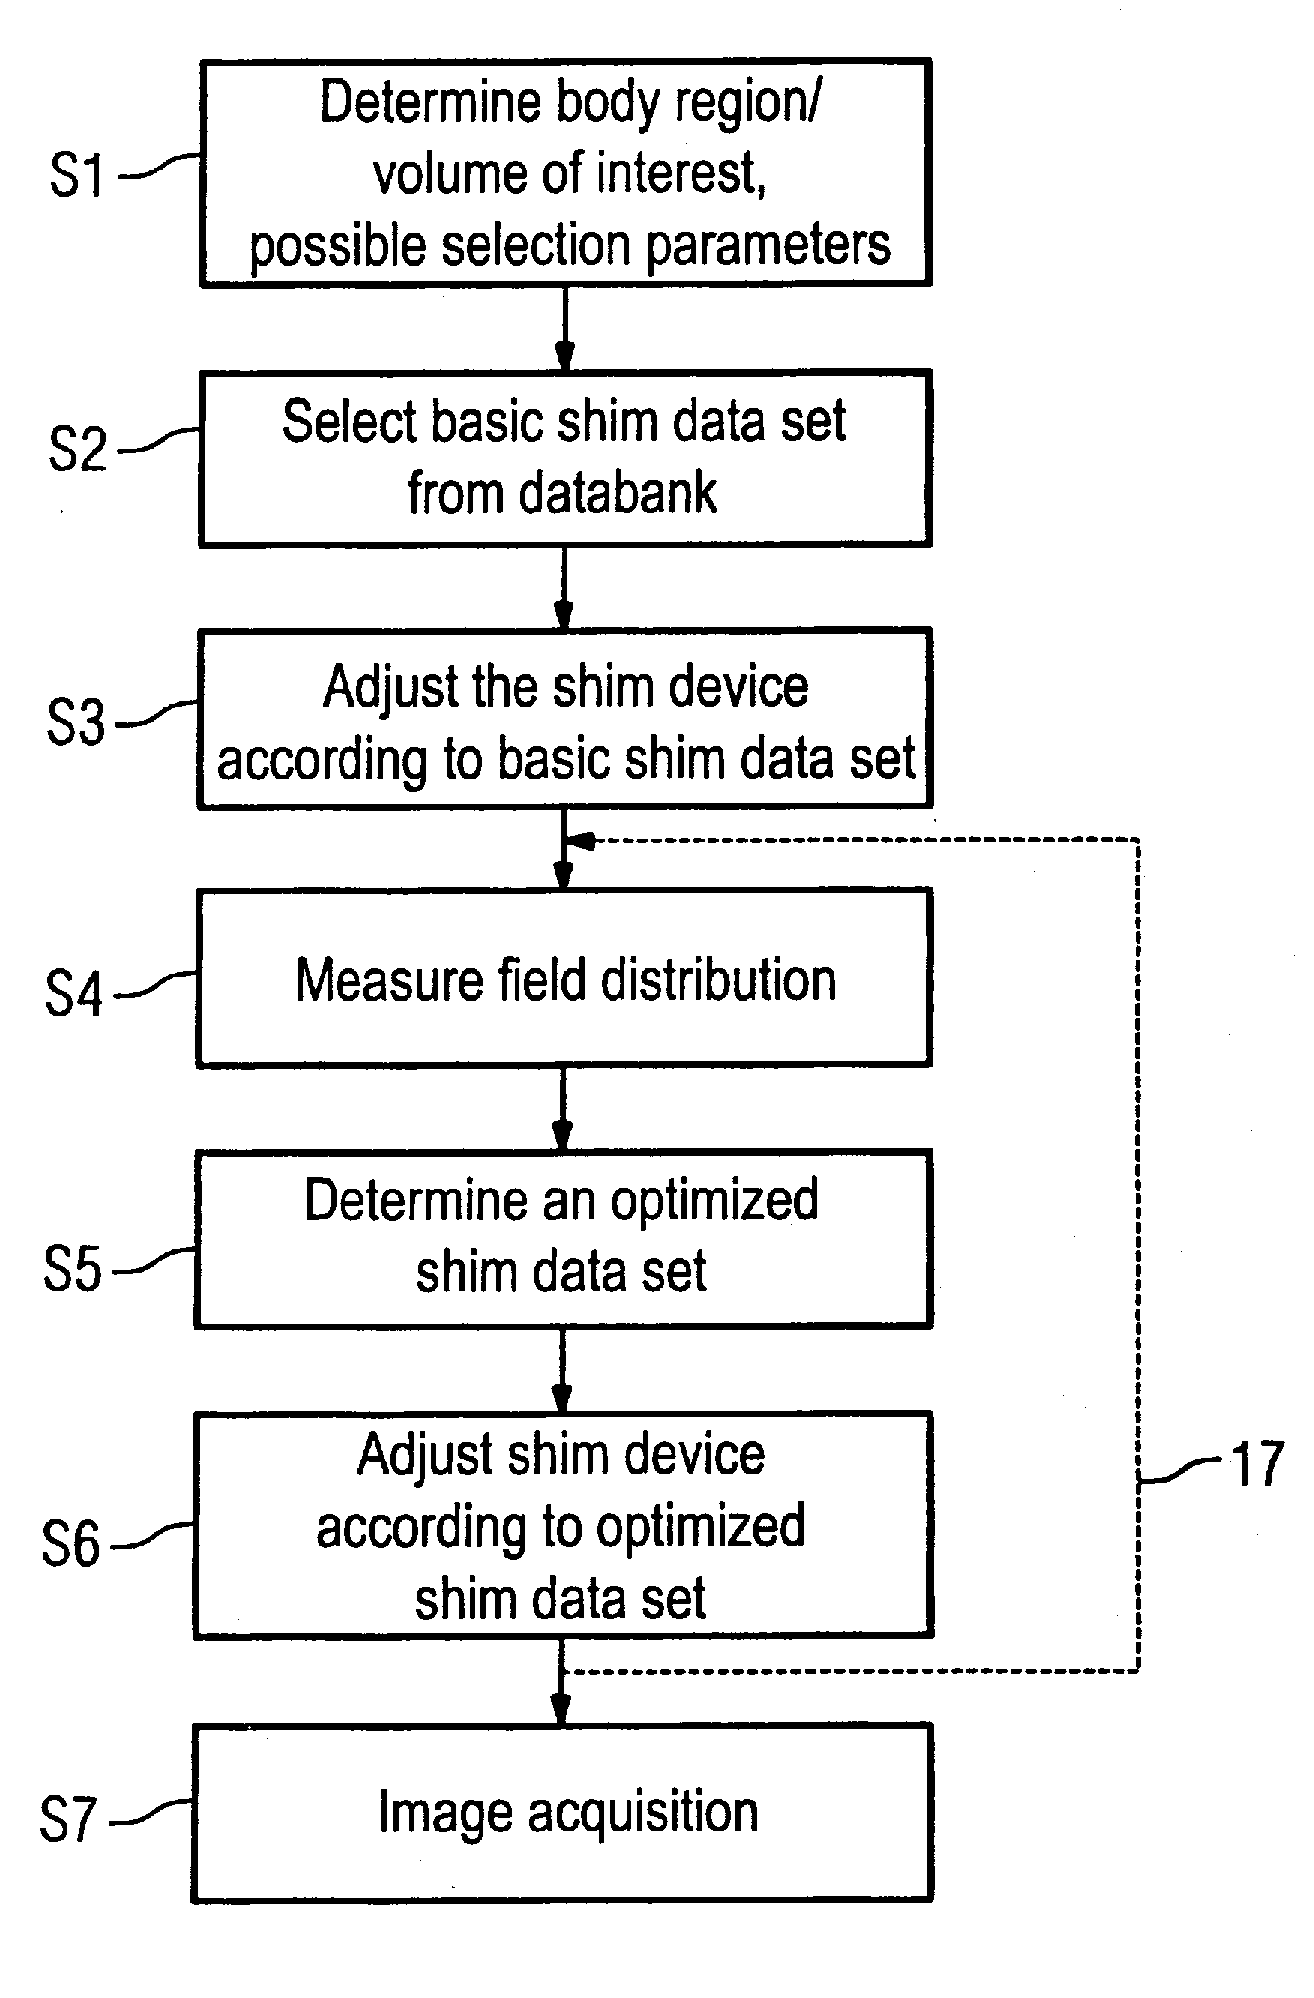 Method for adjustment of a shim device of a magnetic resonance apparatus